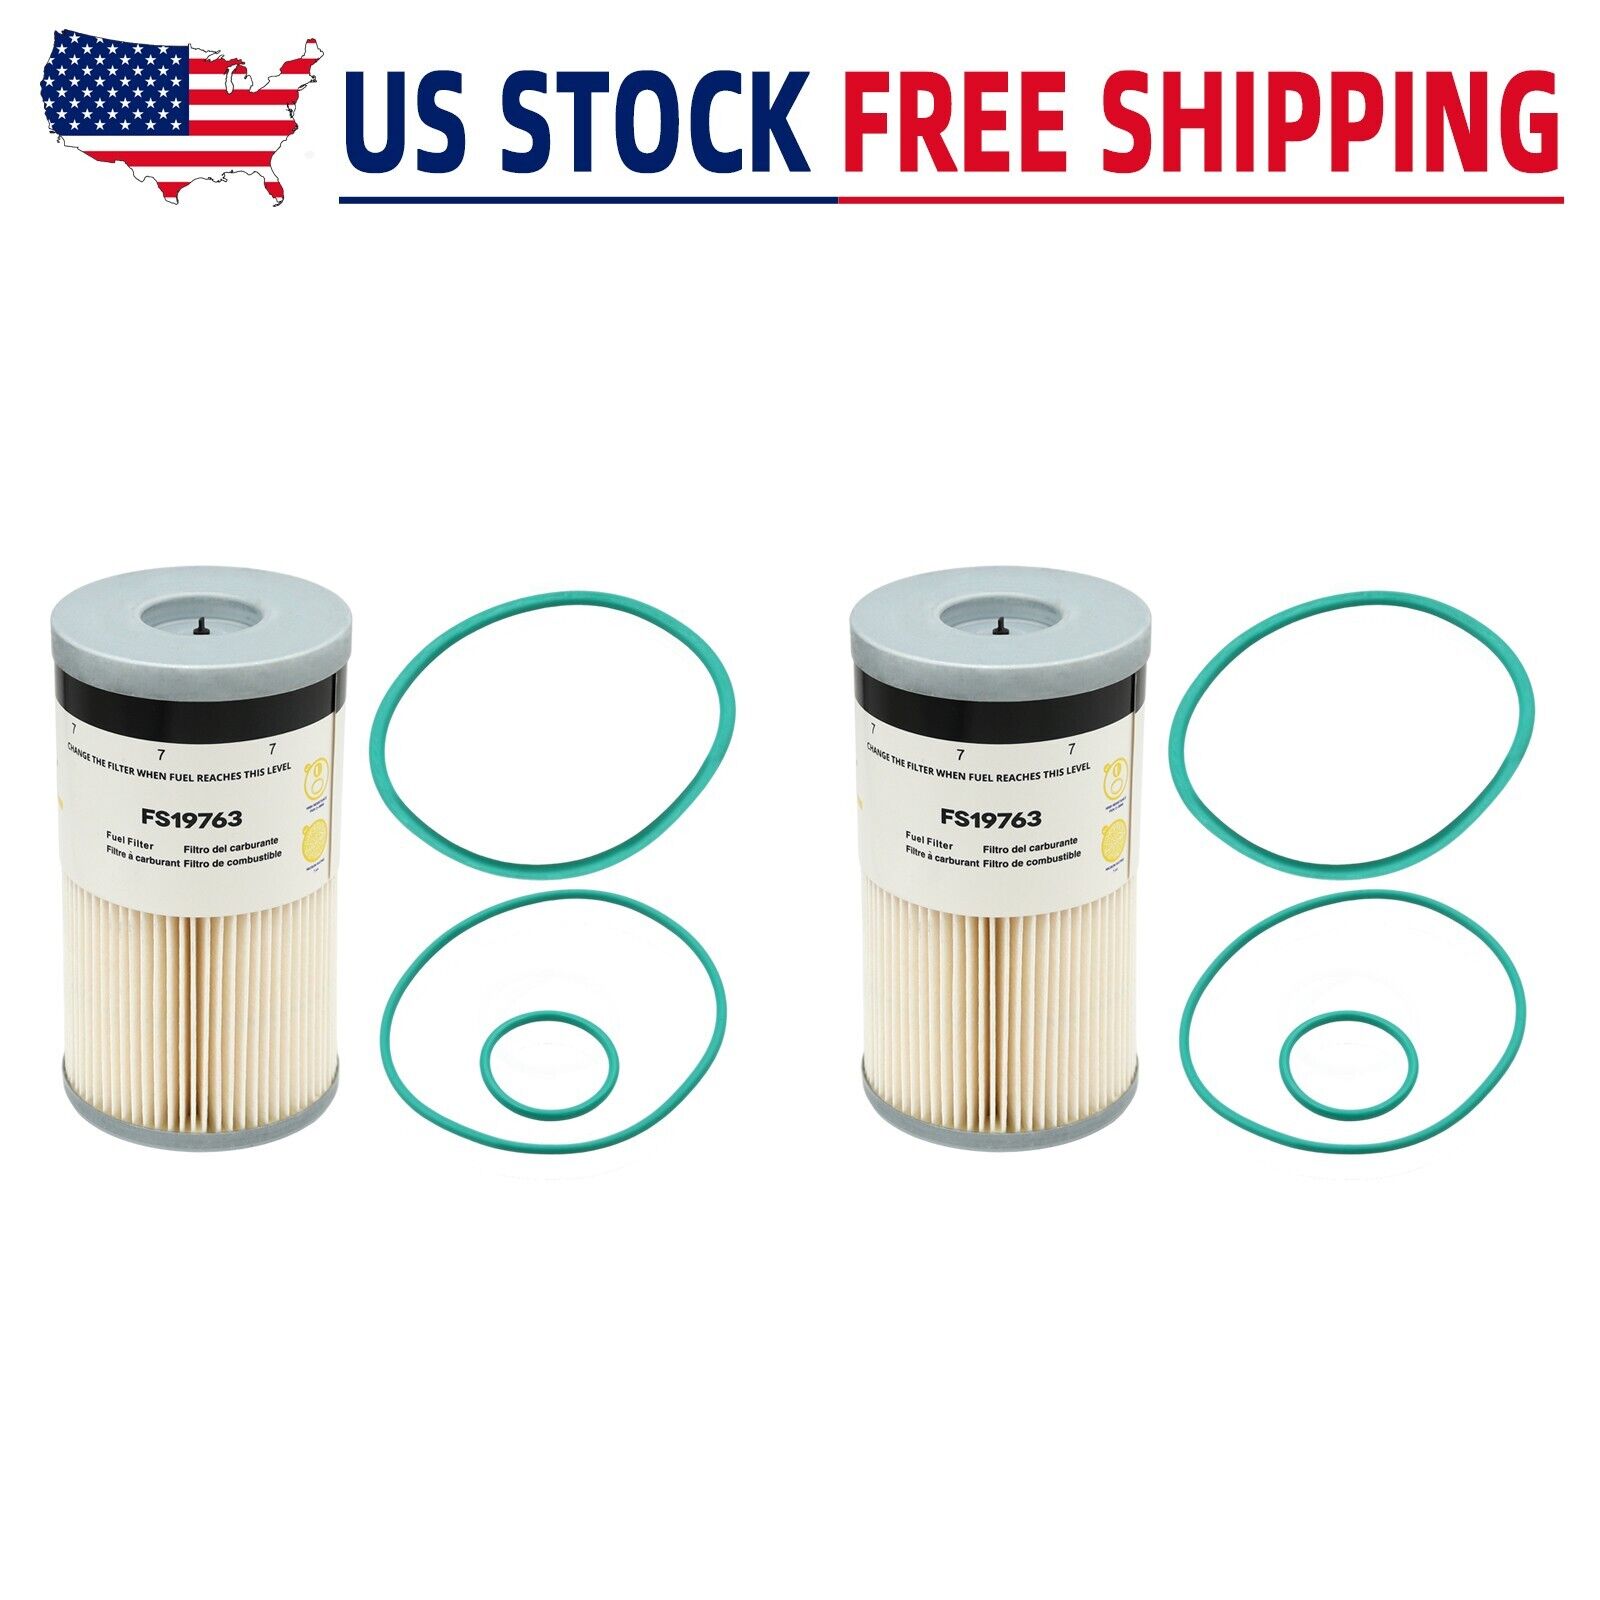 Kit of 2 For FleetGuard Fuel Filter with Water Separator FS19763 7micron